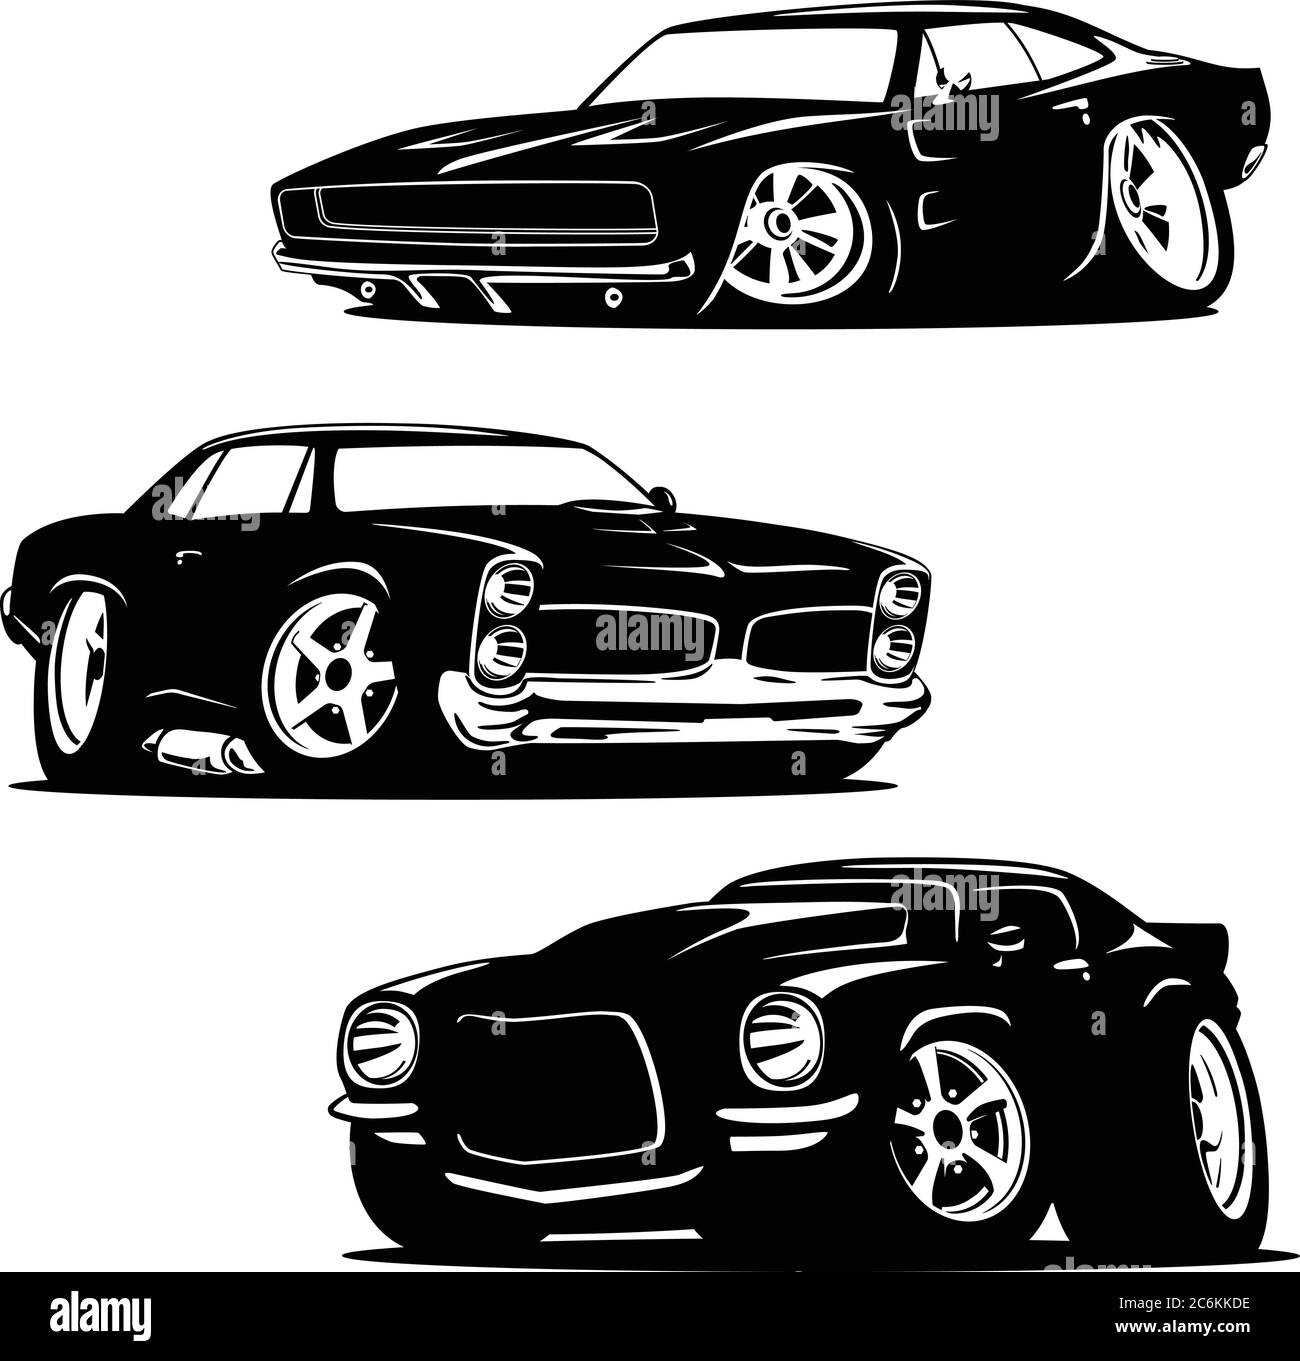 Muscle Cars Cartoons Silhouette Set Illustrazione vettoriale isolata Illustrazione Vettoriale